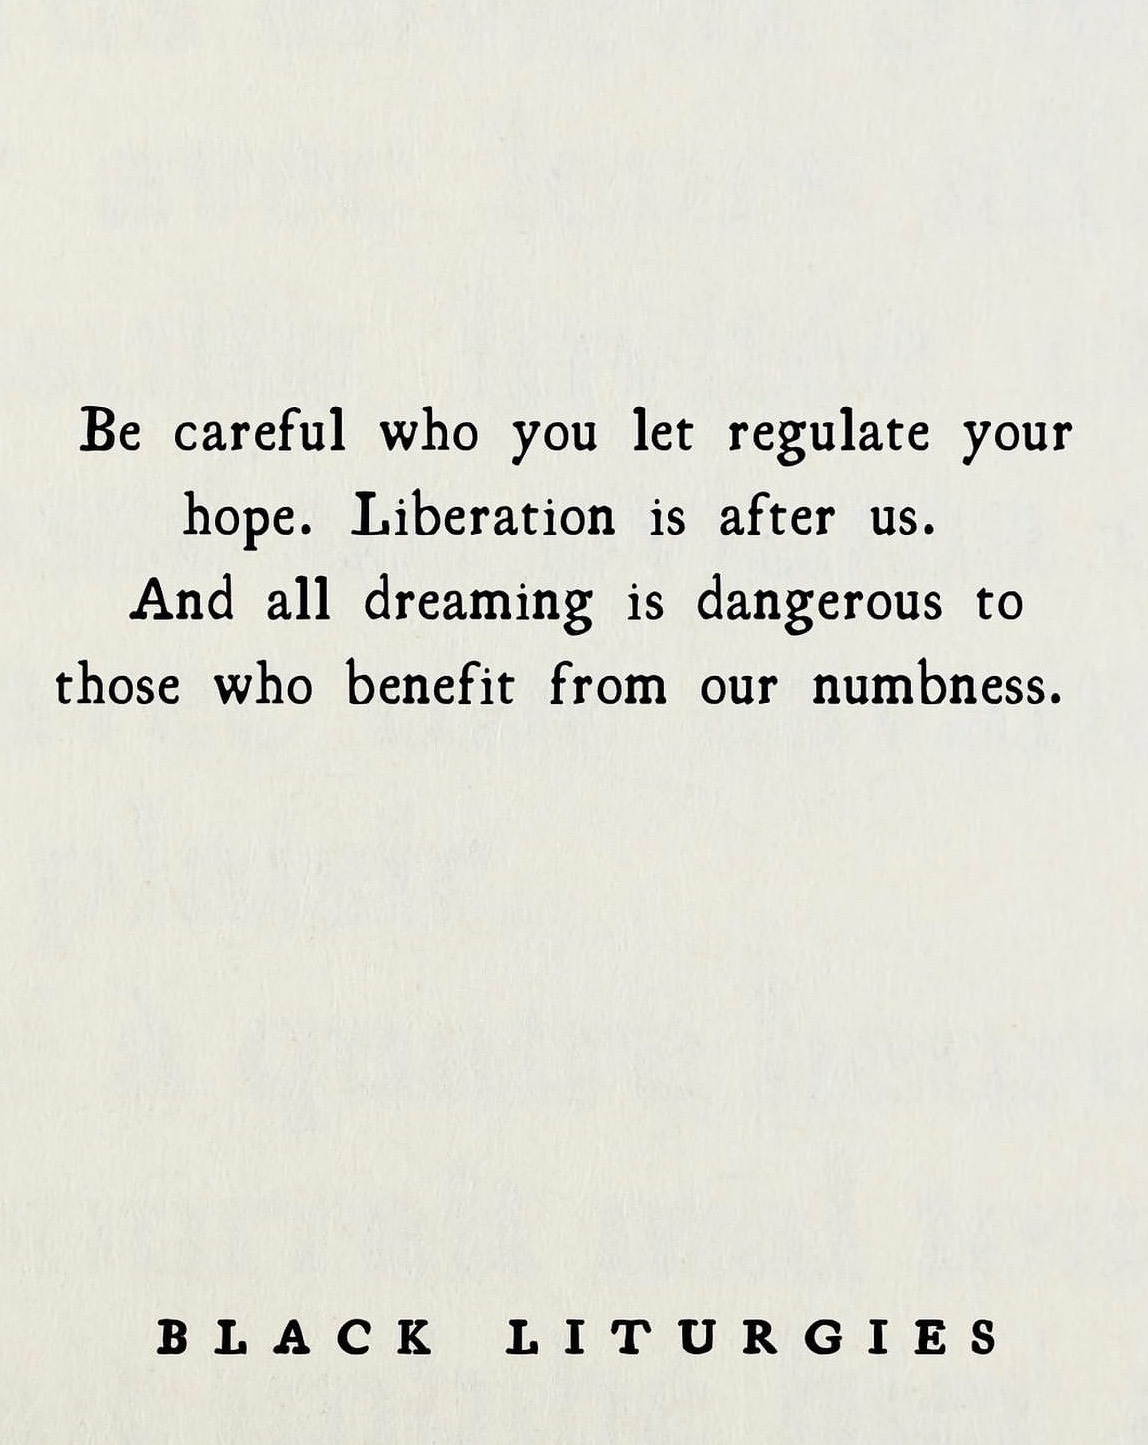 an off-white background that resembles an aged piece of paper with black text in a typewriter font that reads: "Be careful who you let regulate your hope. Liberation is after us. And all dreaming is dangerous to those who benefit from our numbness." with additional text at the bottom of the page that reads: "Black Liturgies" in capital letters.